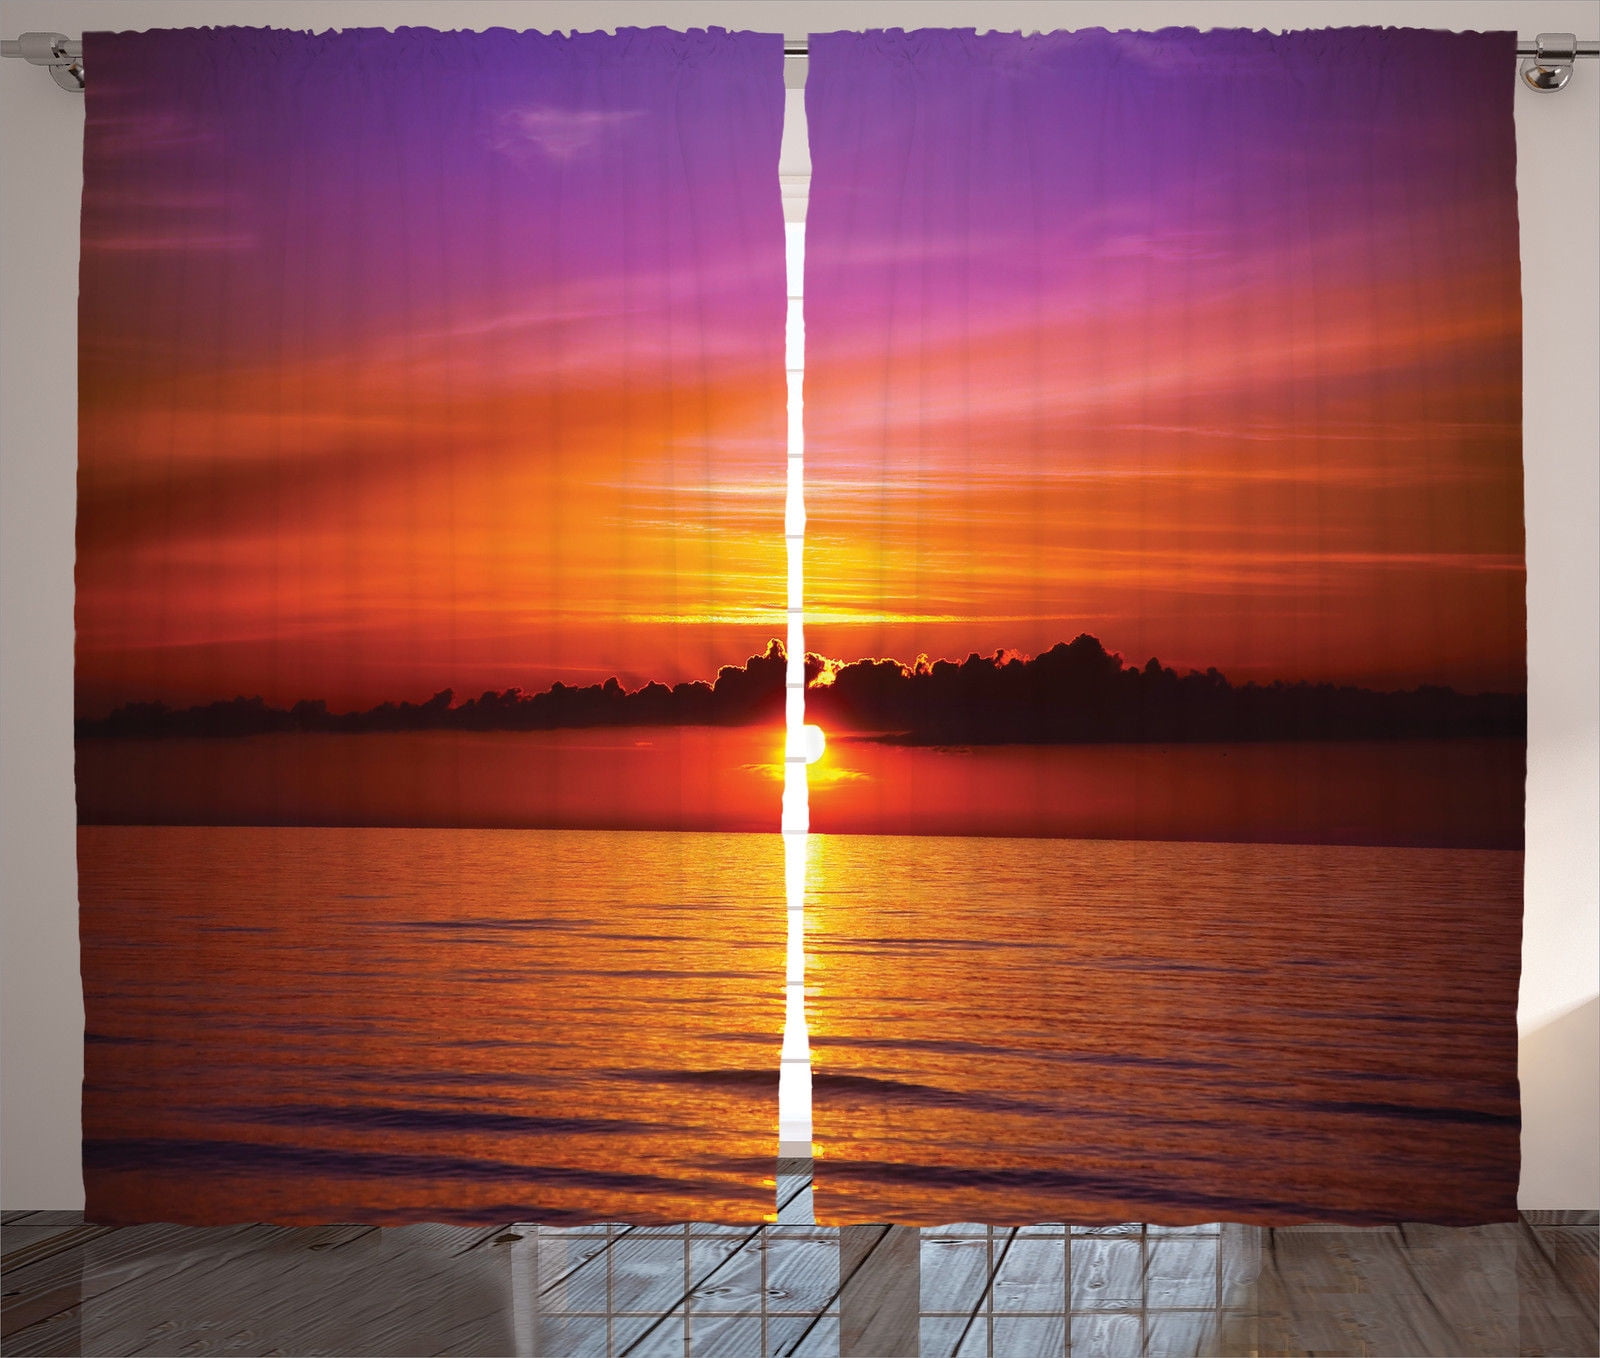 Sunset Reflected Sea 3D Curtains Blockout Photo Printing Curtains Drape Fabric 